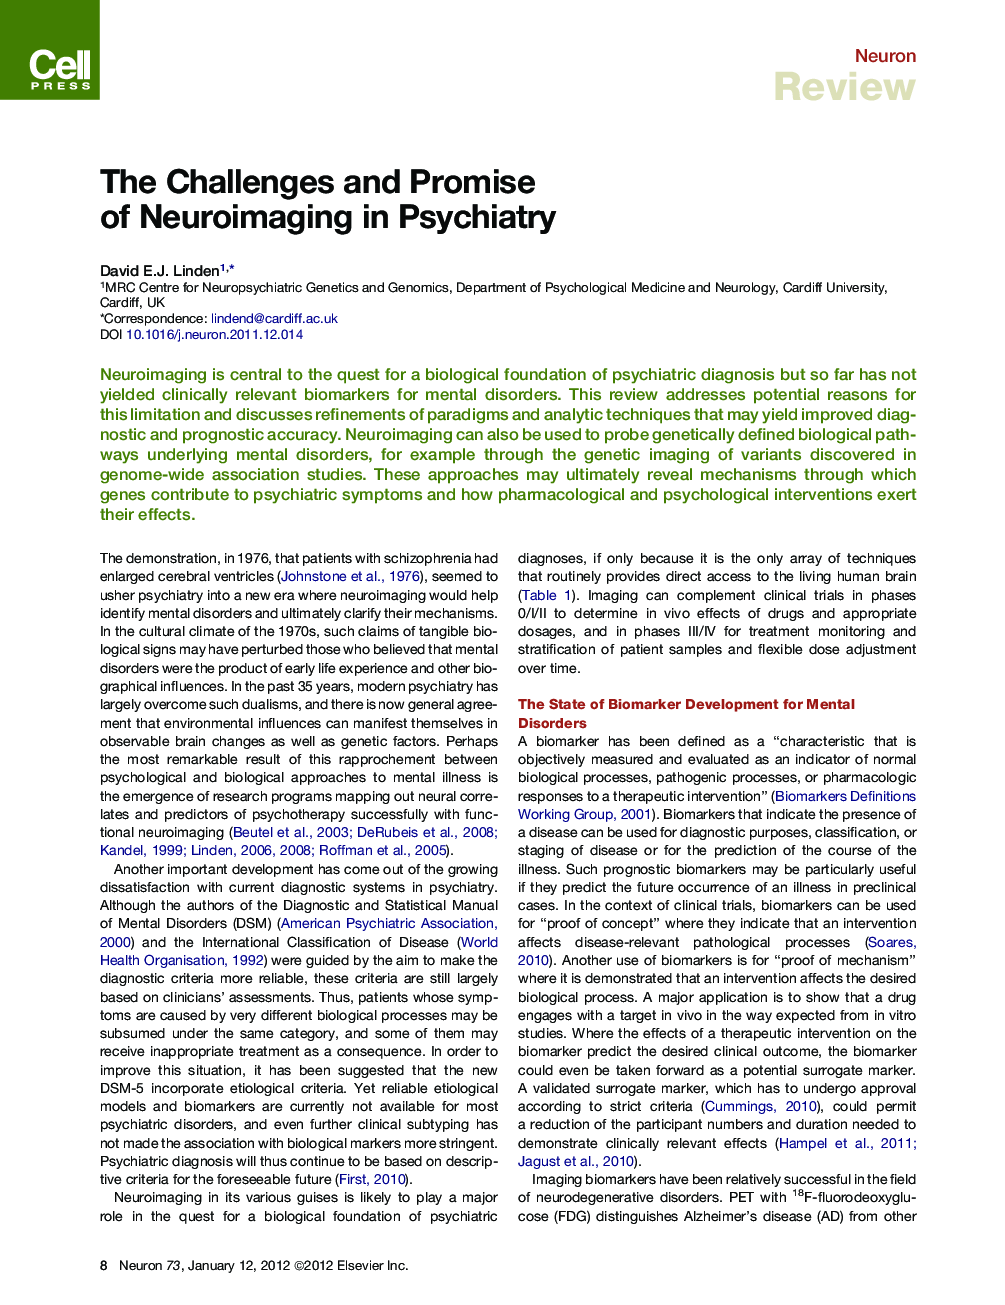 The Challenges and Promise of Neuroimaging in Psychiatry